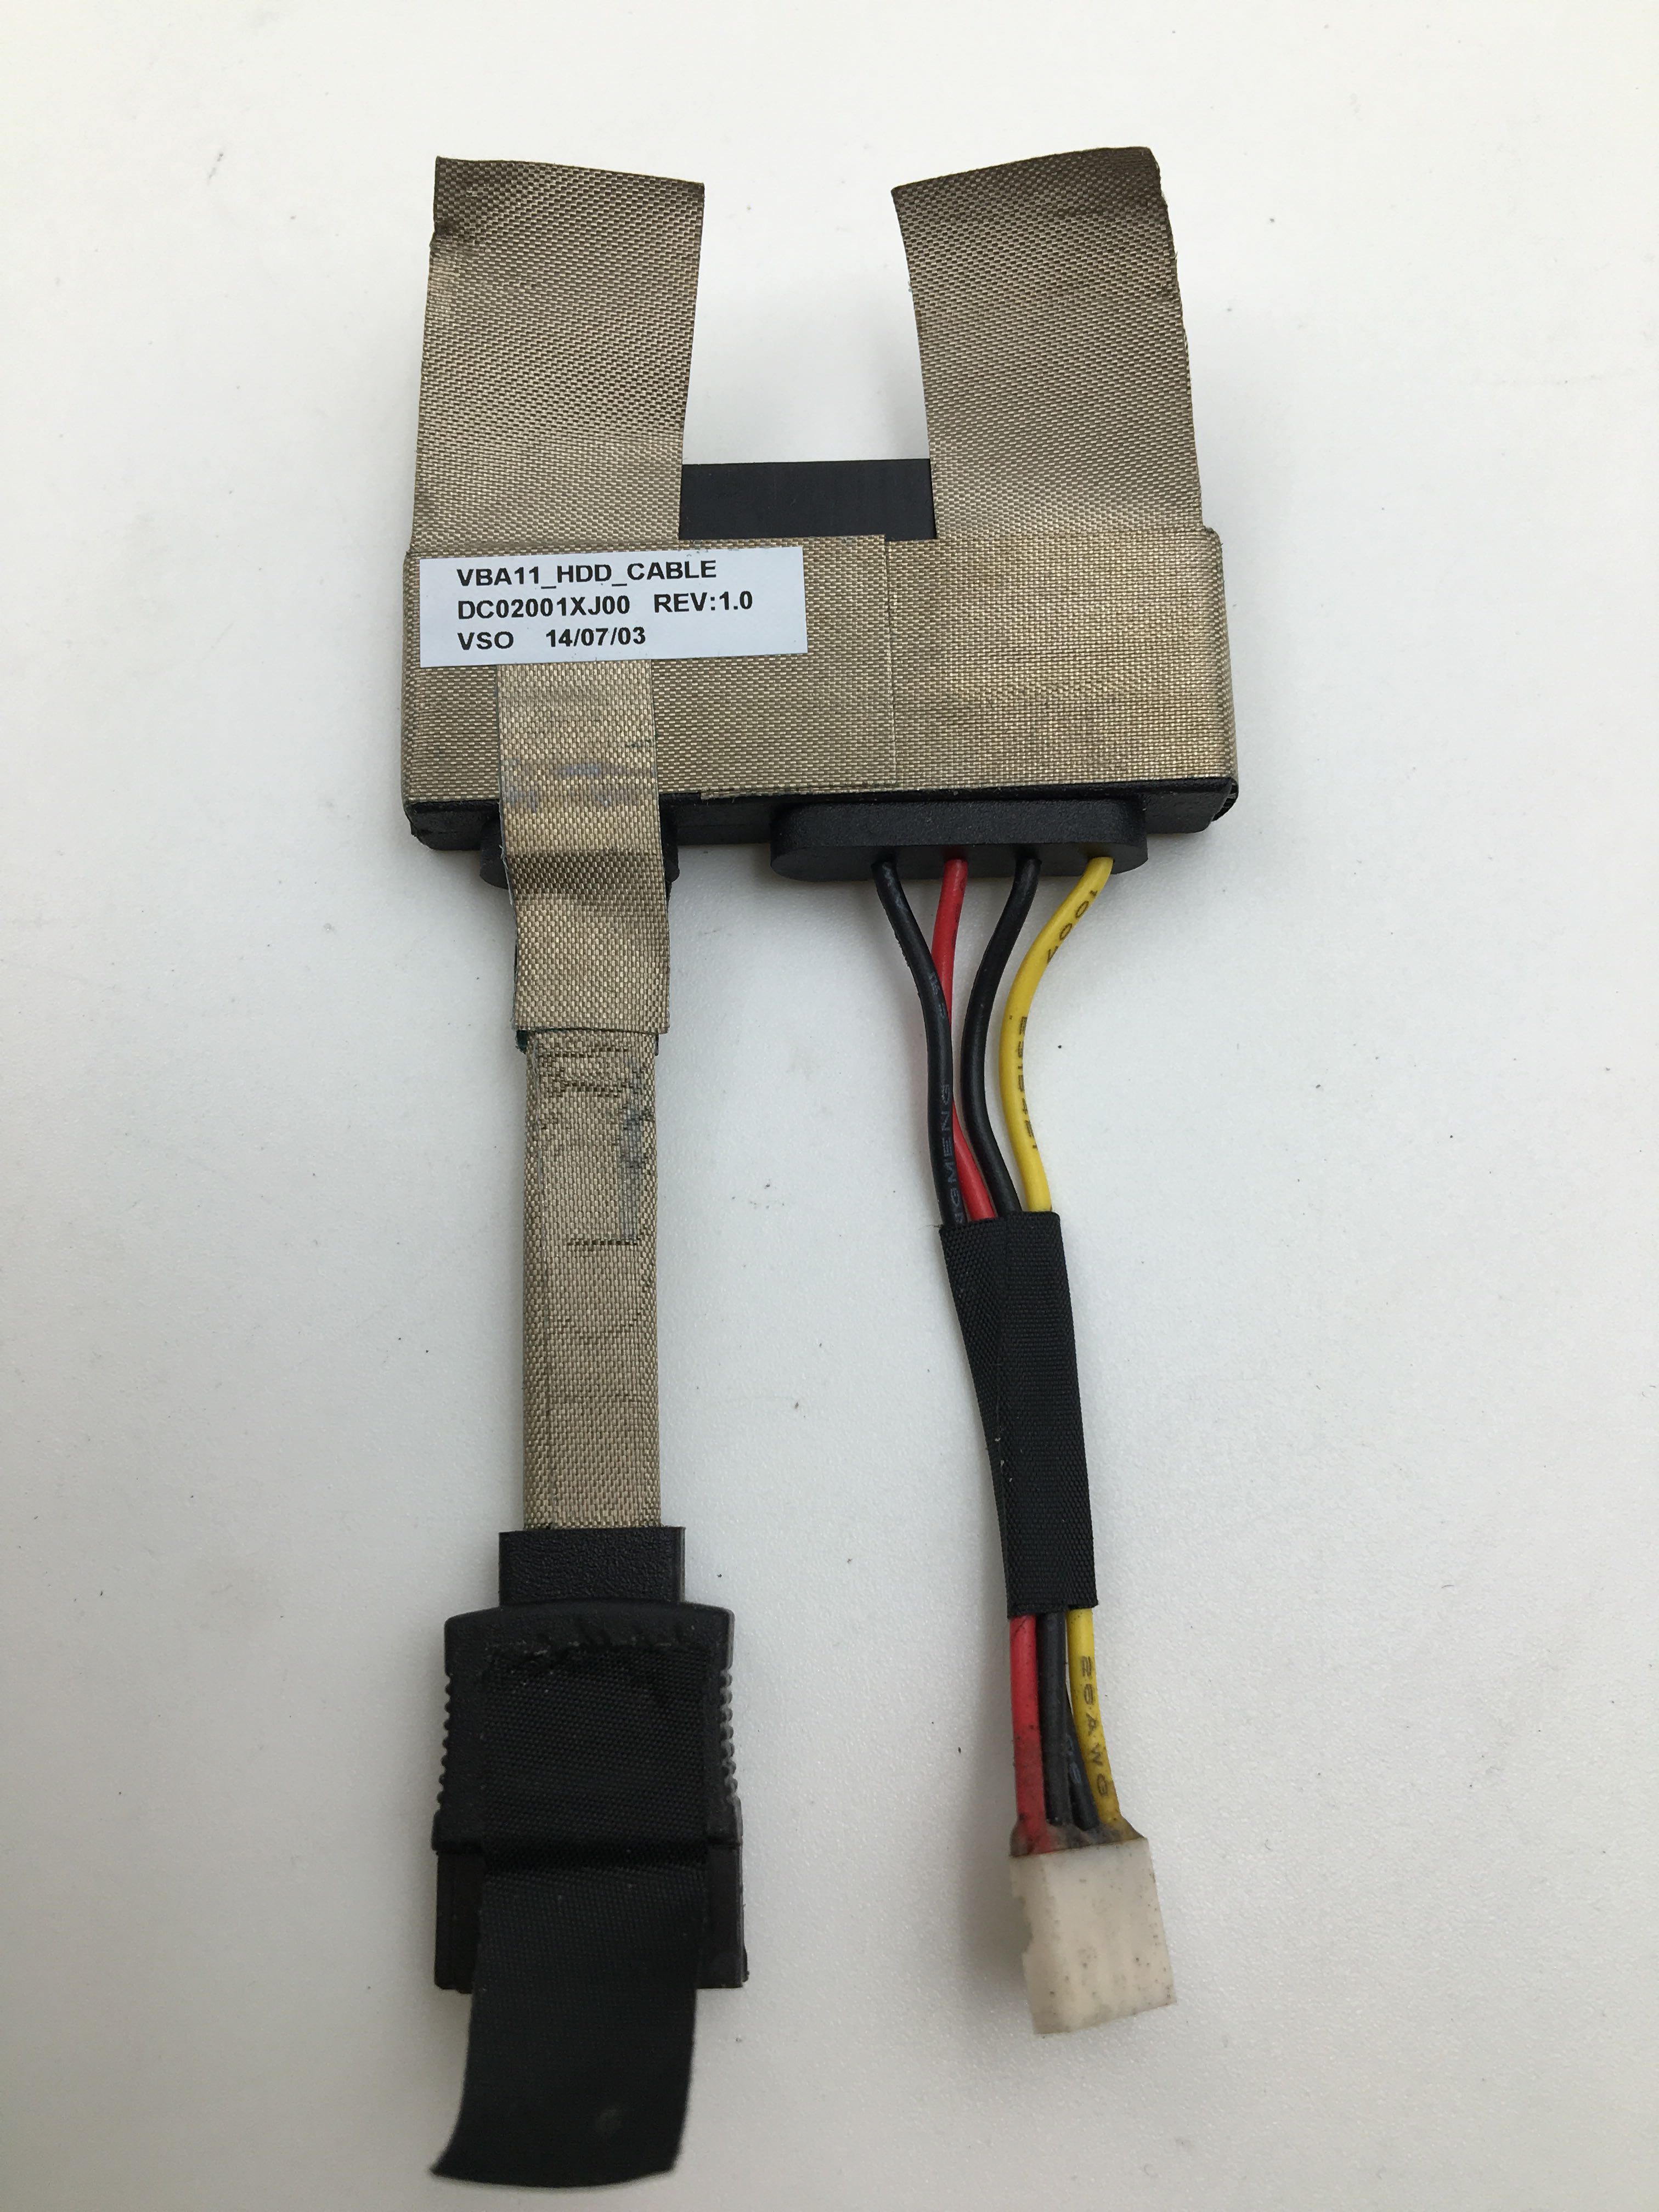 New Lenovo C240 C245 VBA11 DC02001XJ00 90204435 All in One SATA Power HDD Hard Disk Drive Cable Connector